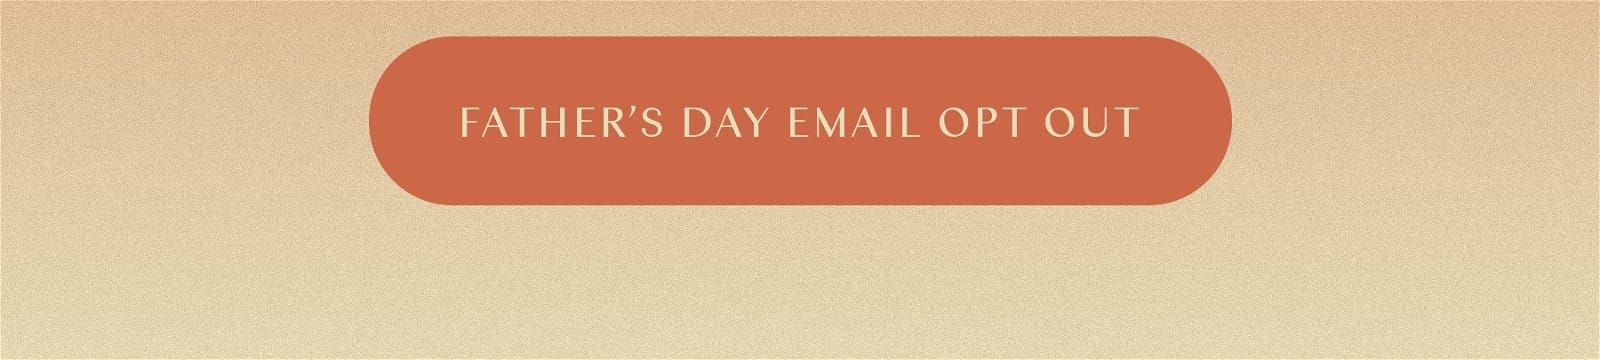 Opt out of father's day emails